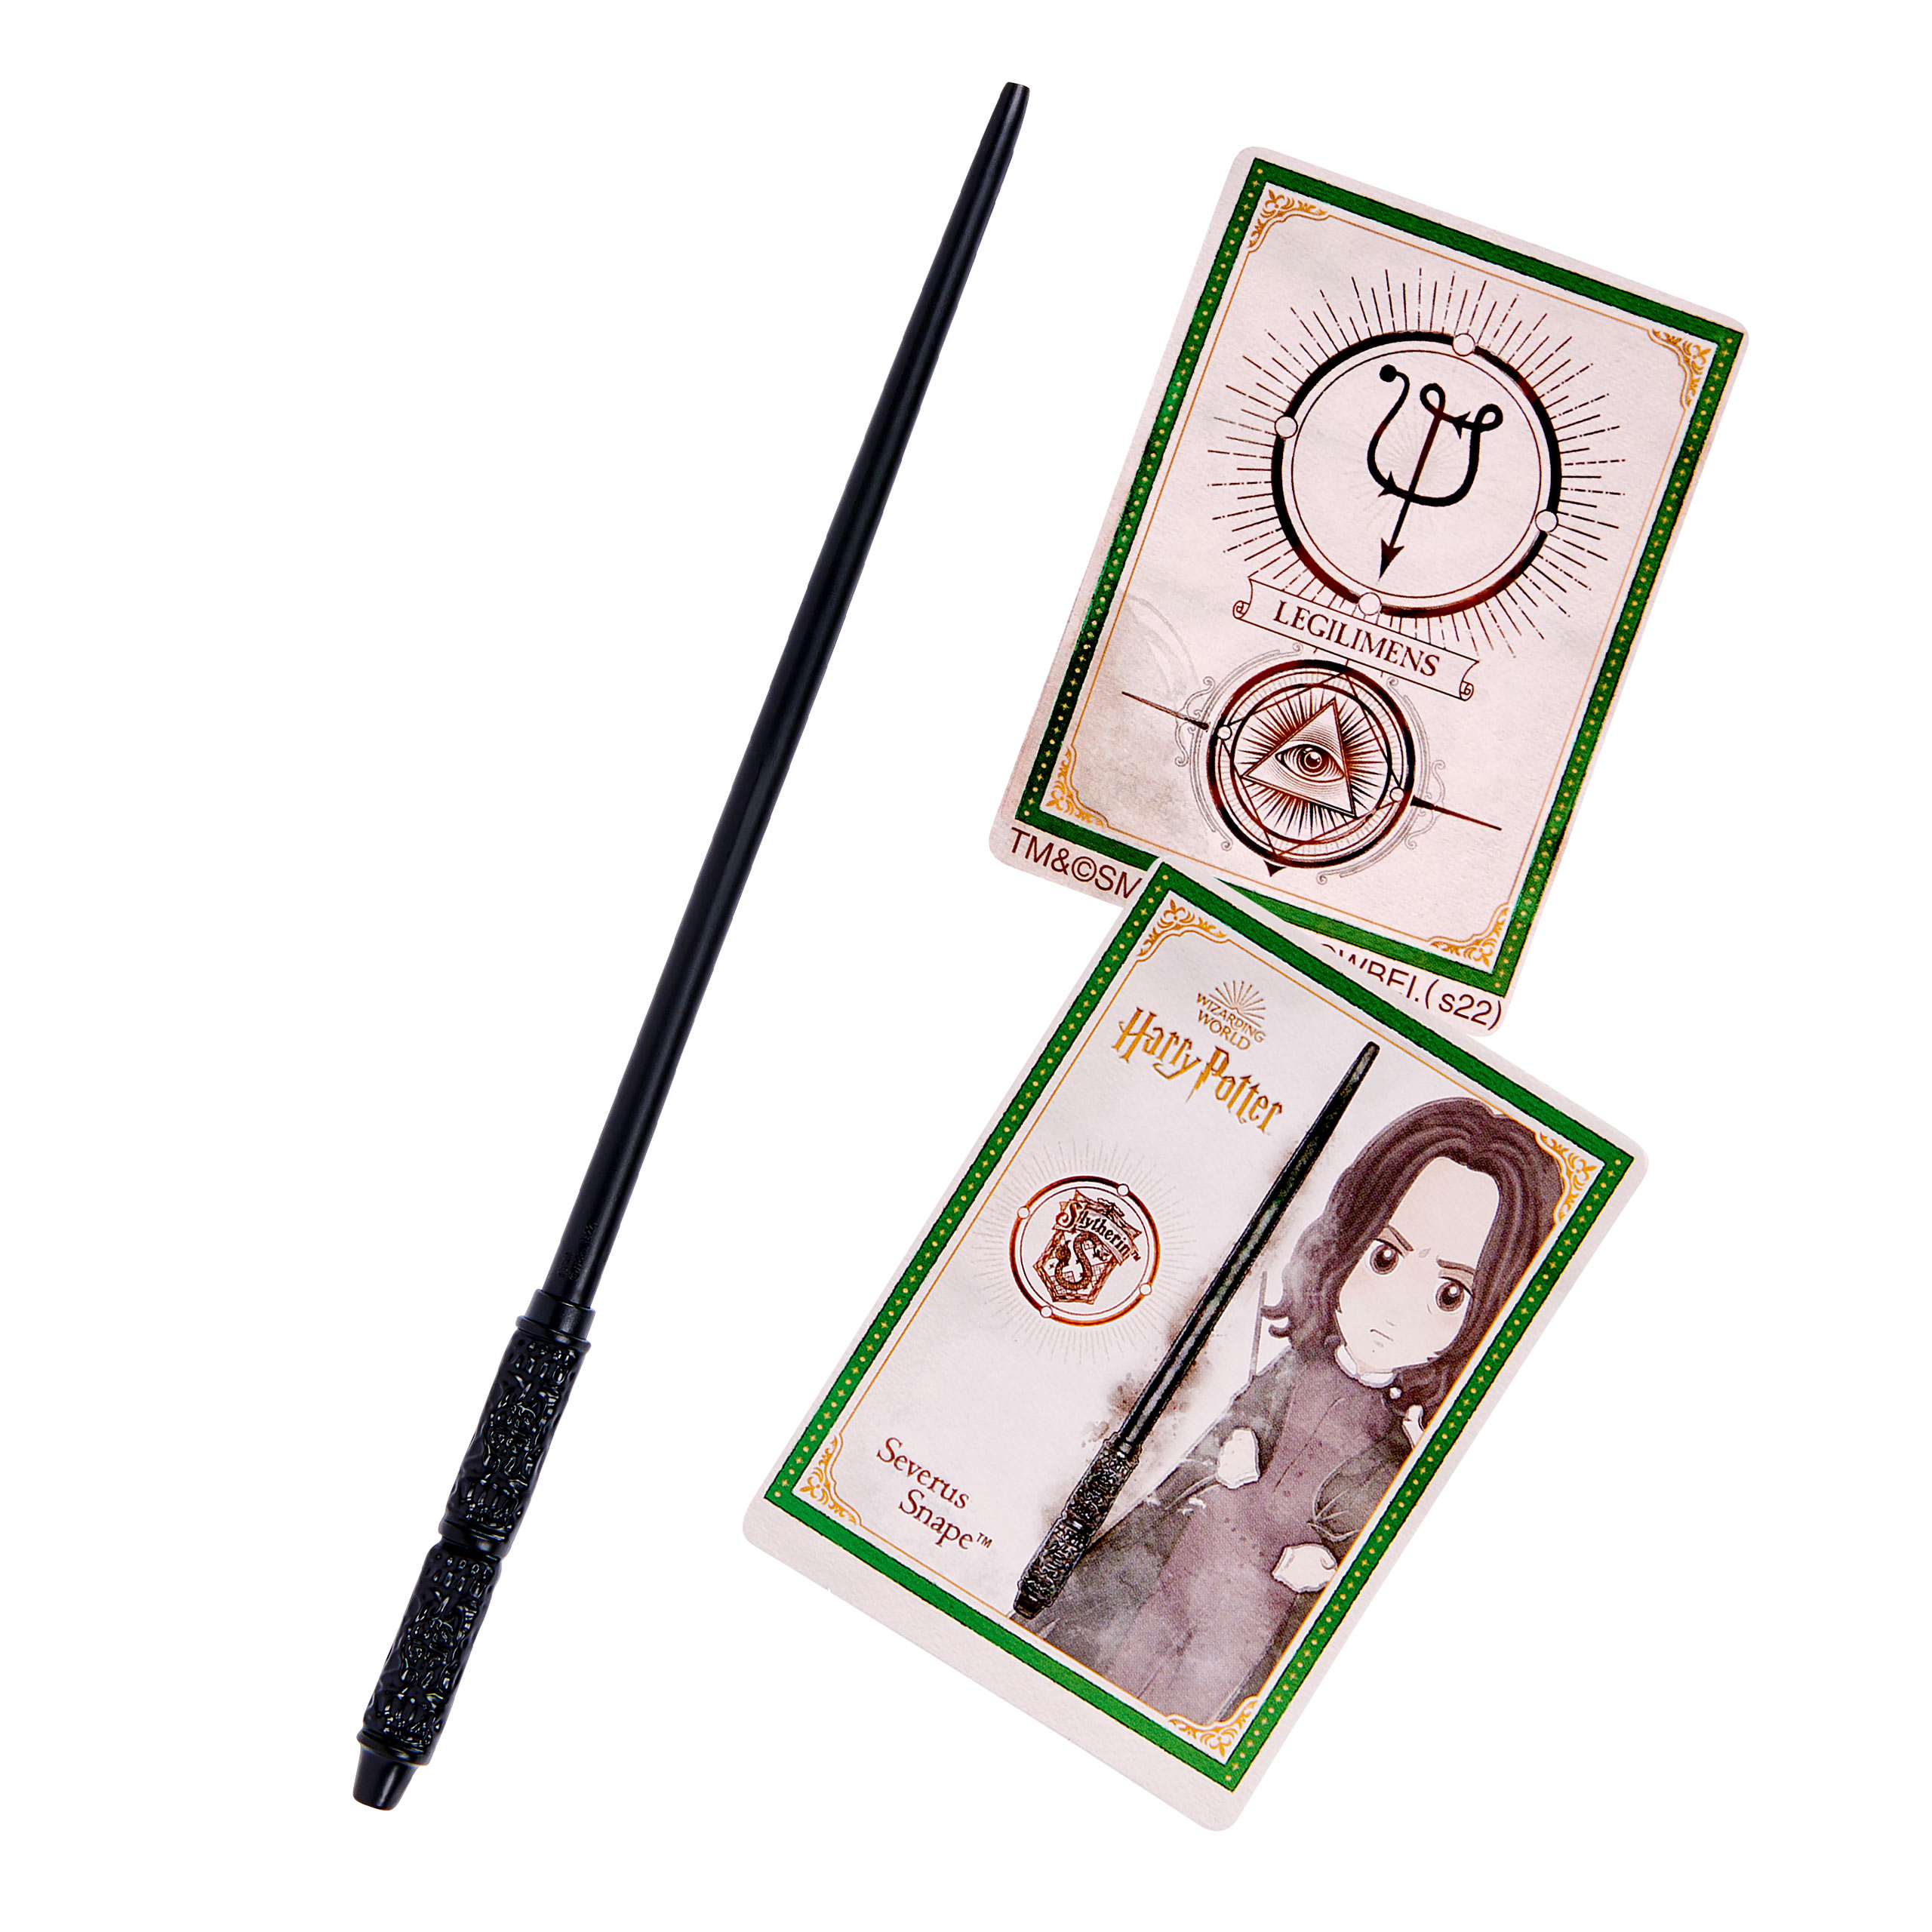 Harry Potter - Snape's Wand with Spell Card